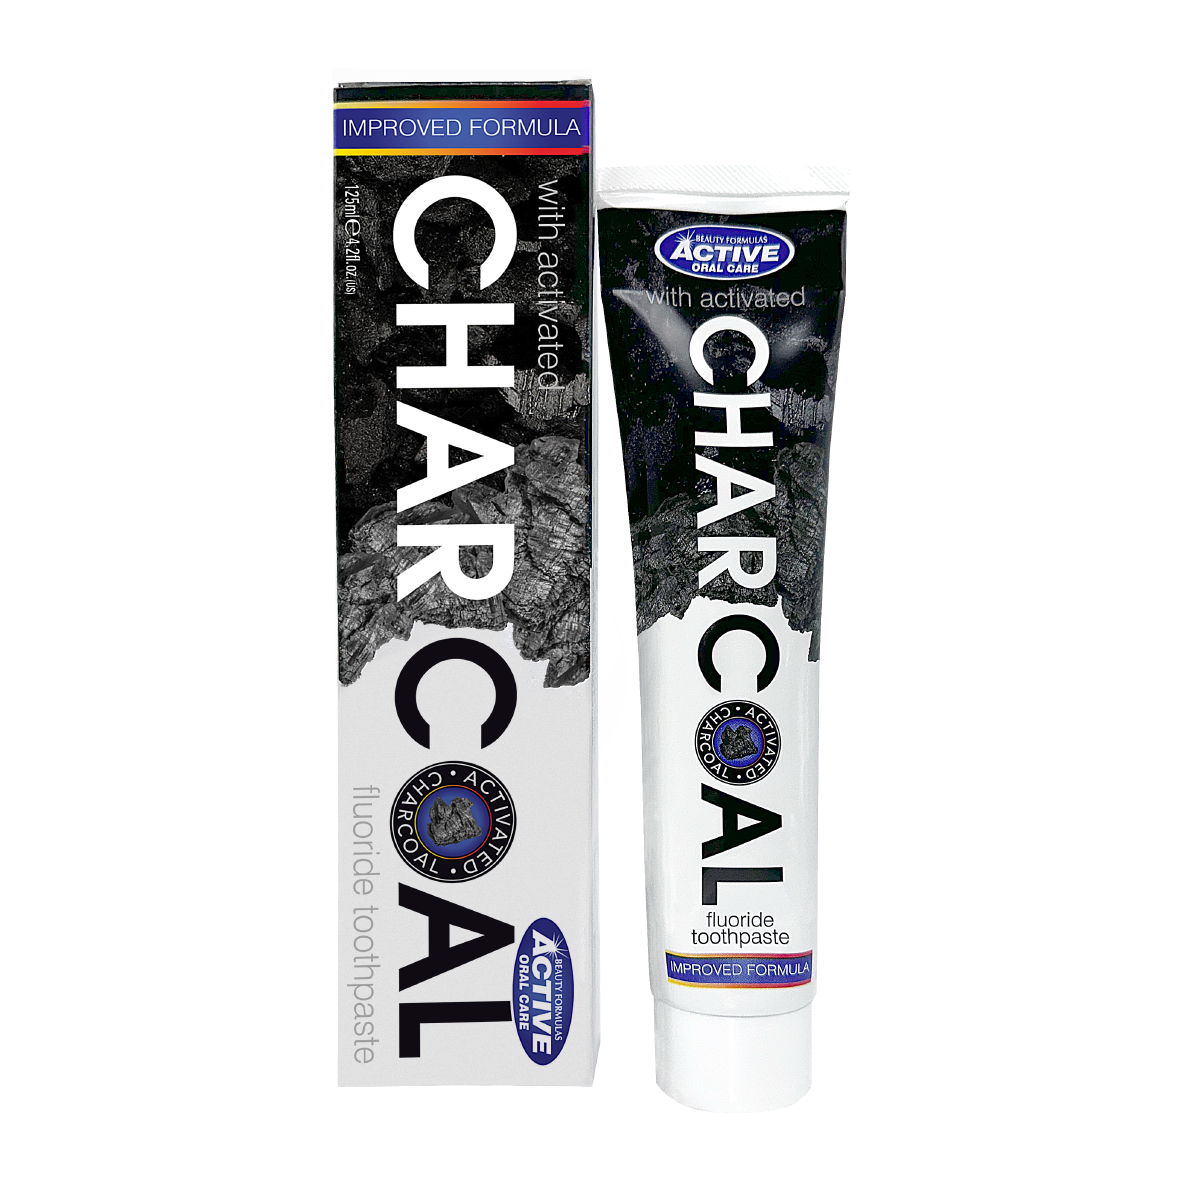 Activated charcoal toothpaste.